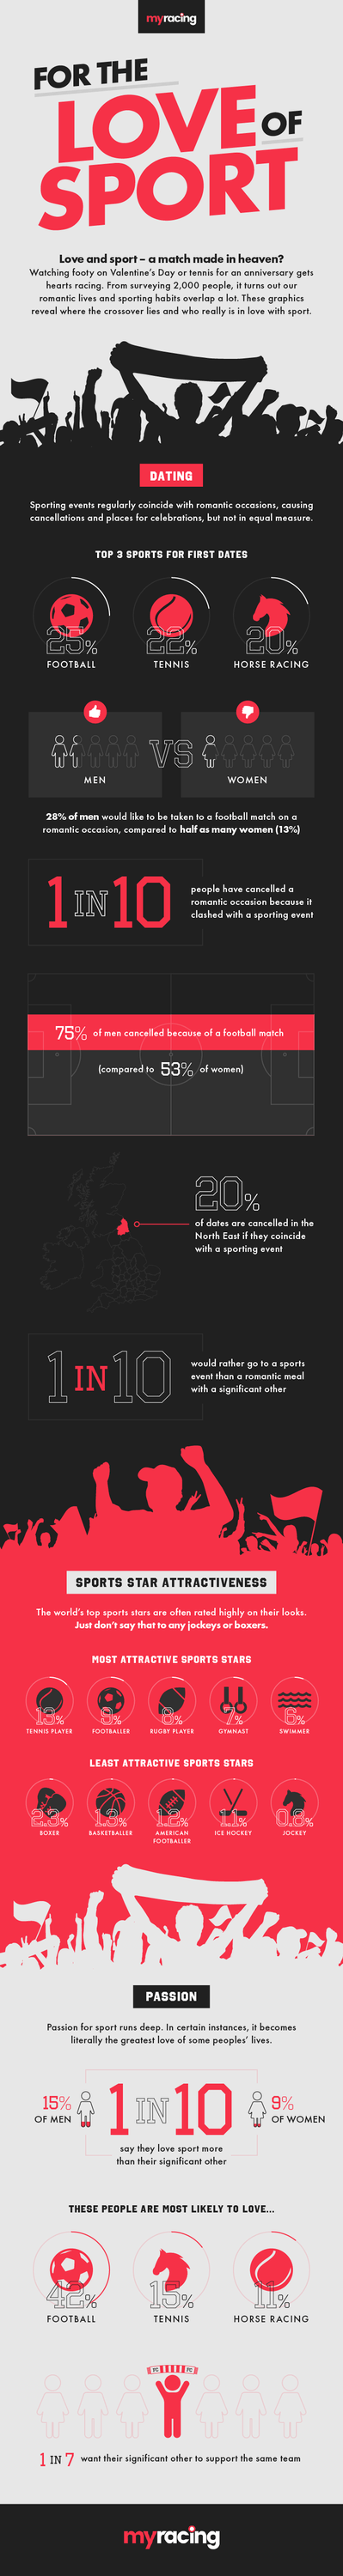 For the Love of Sport Infographic